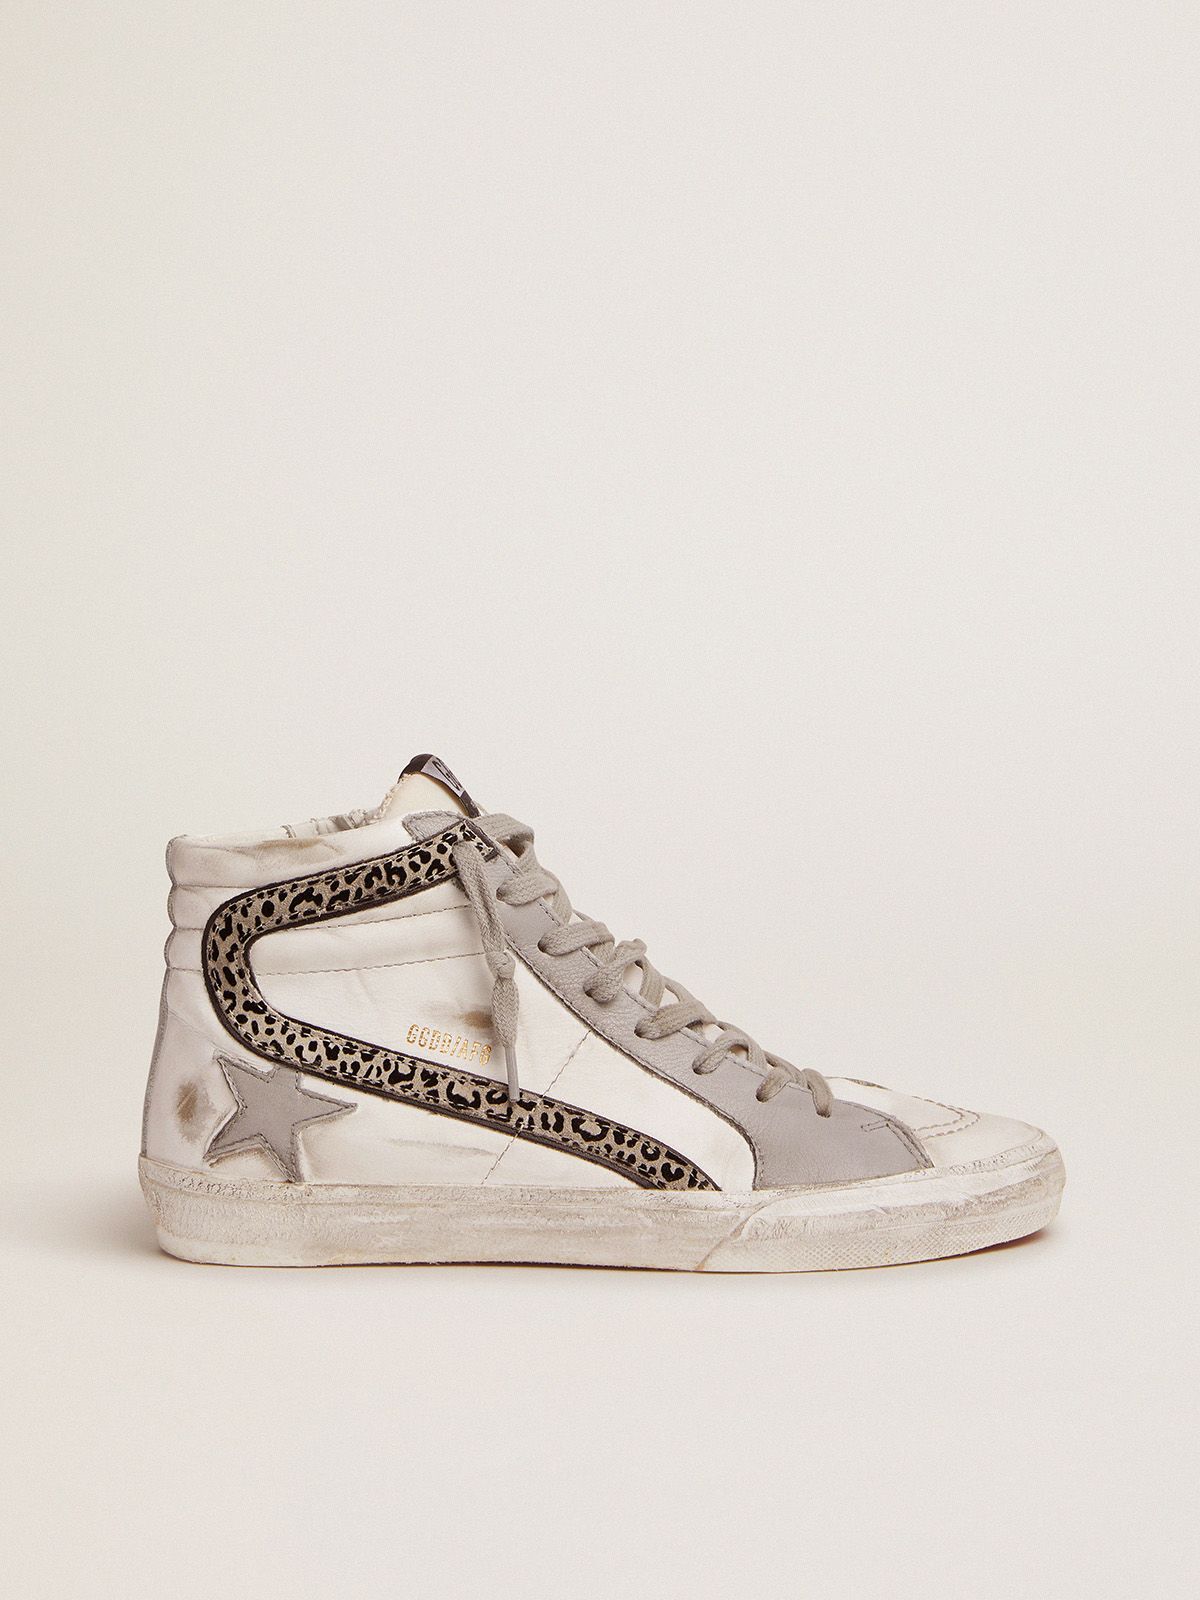 golden goose and upper sneakers leather flash Slide with suede leopard-print white gray